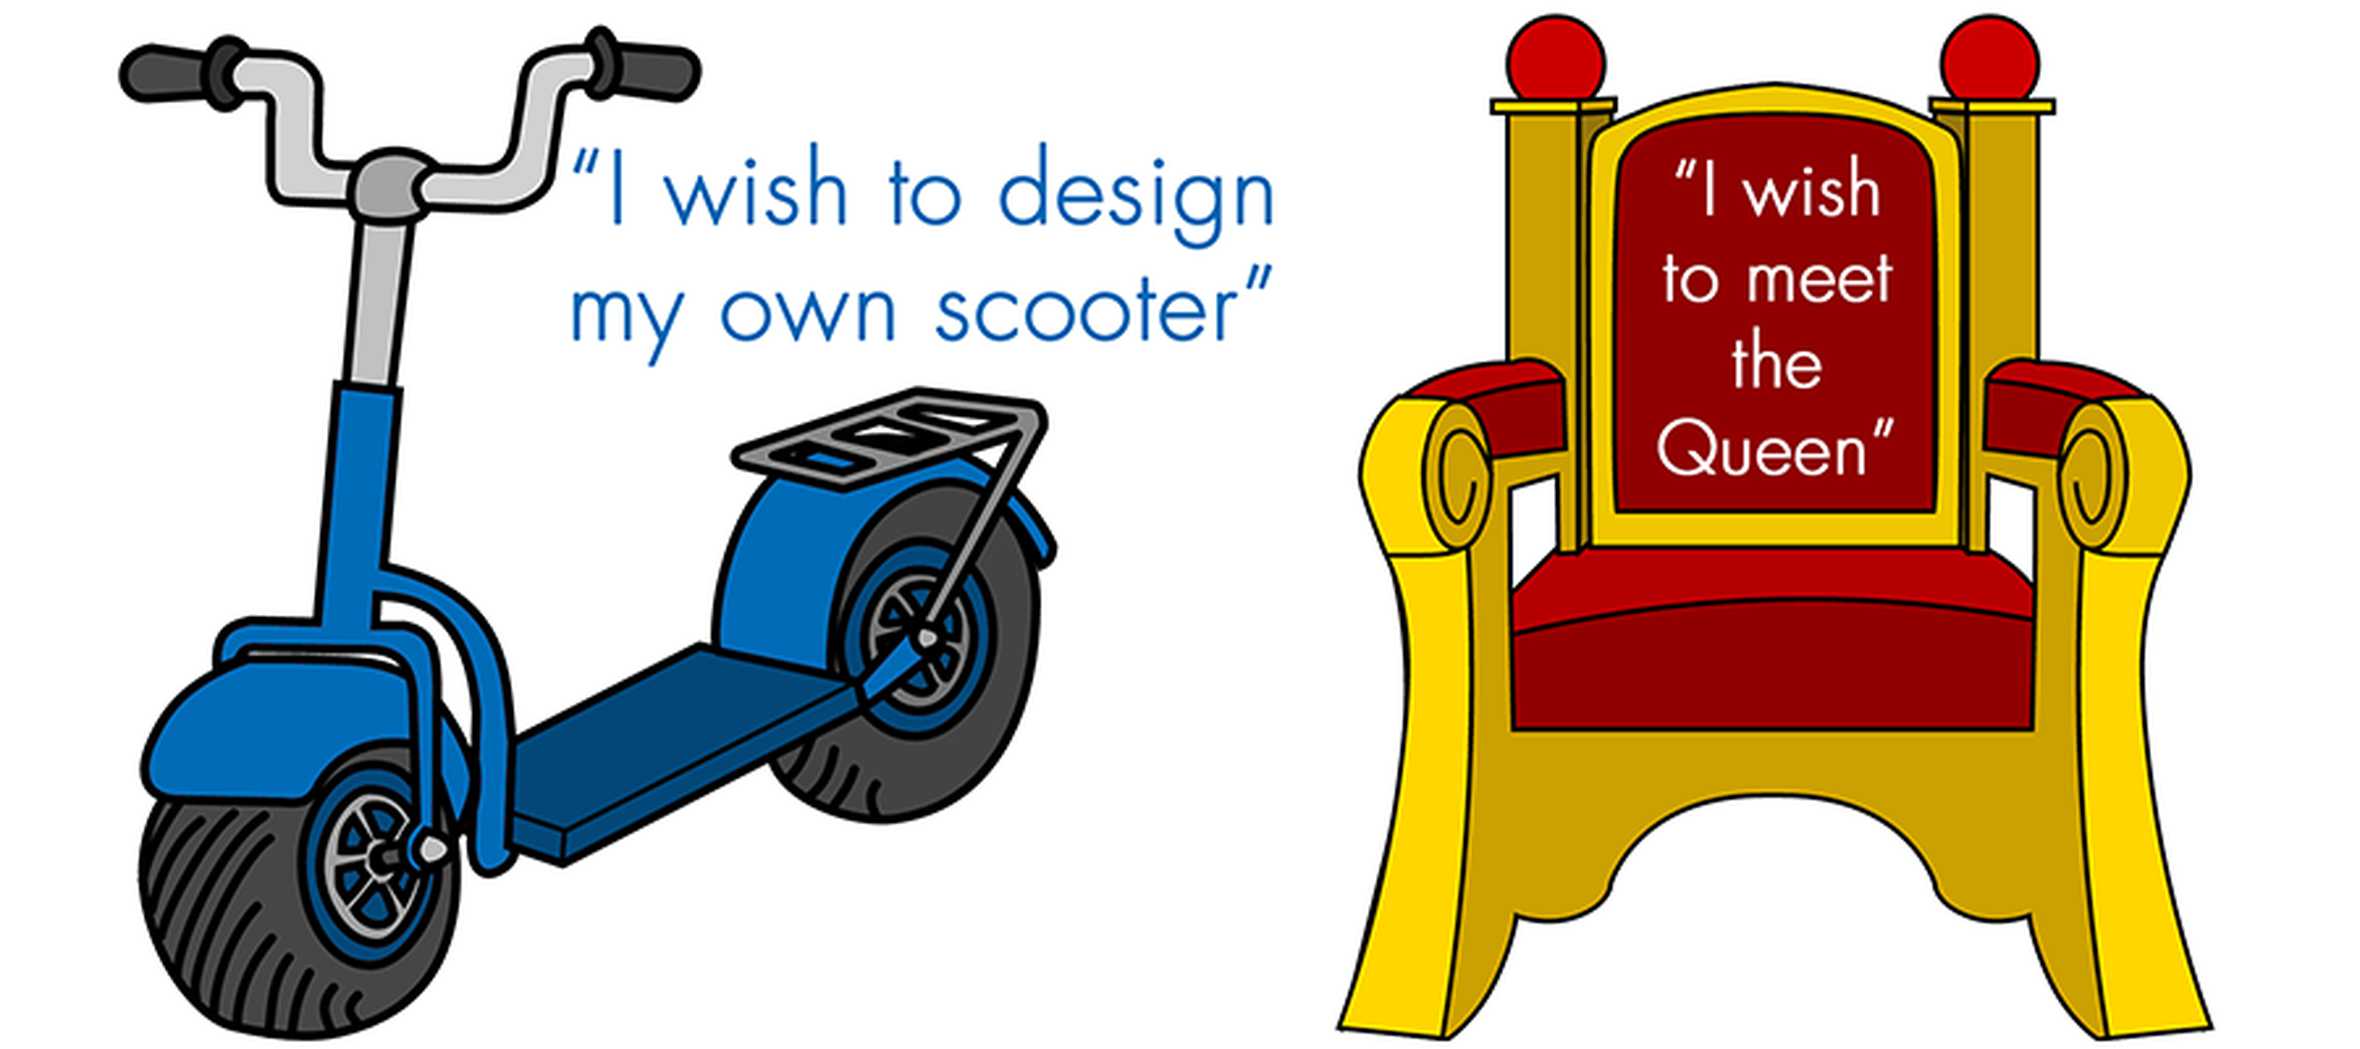 Cartoon of a scooter and a throne